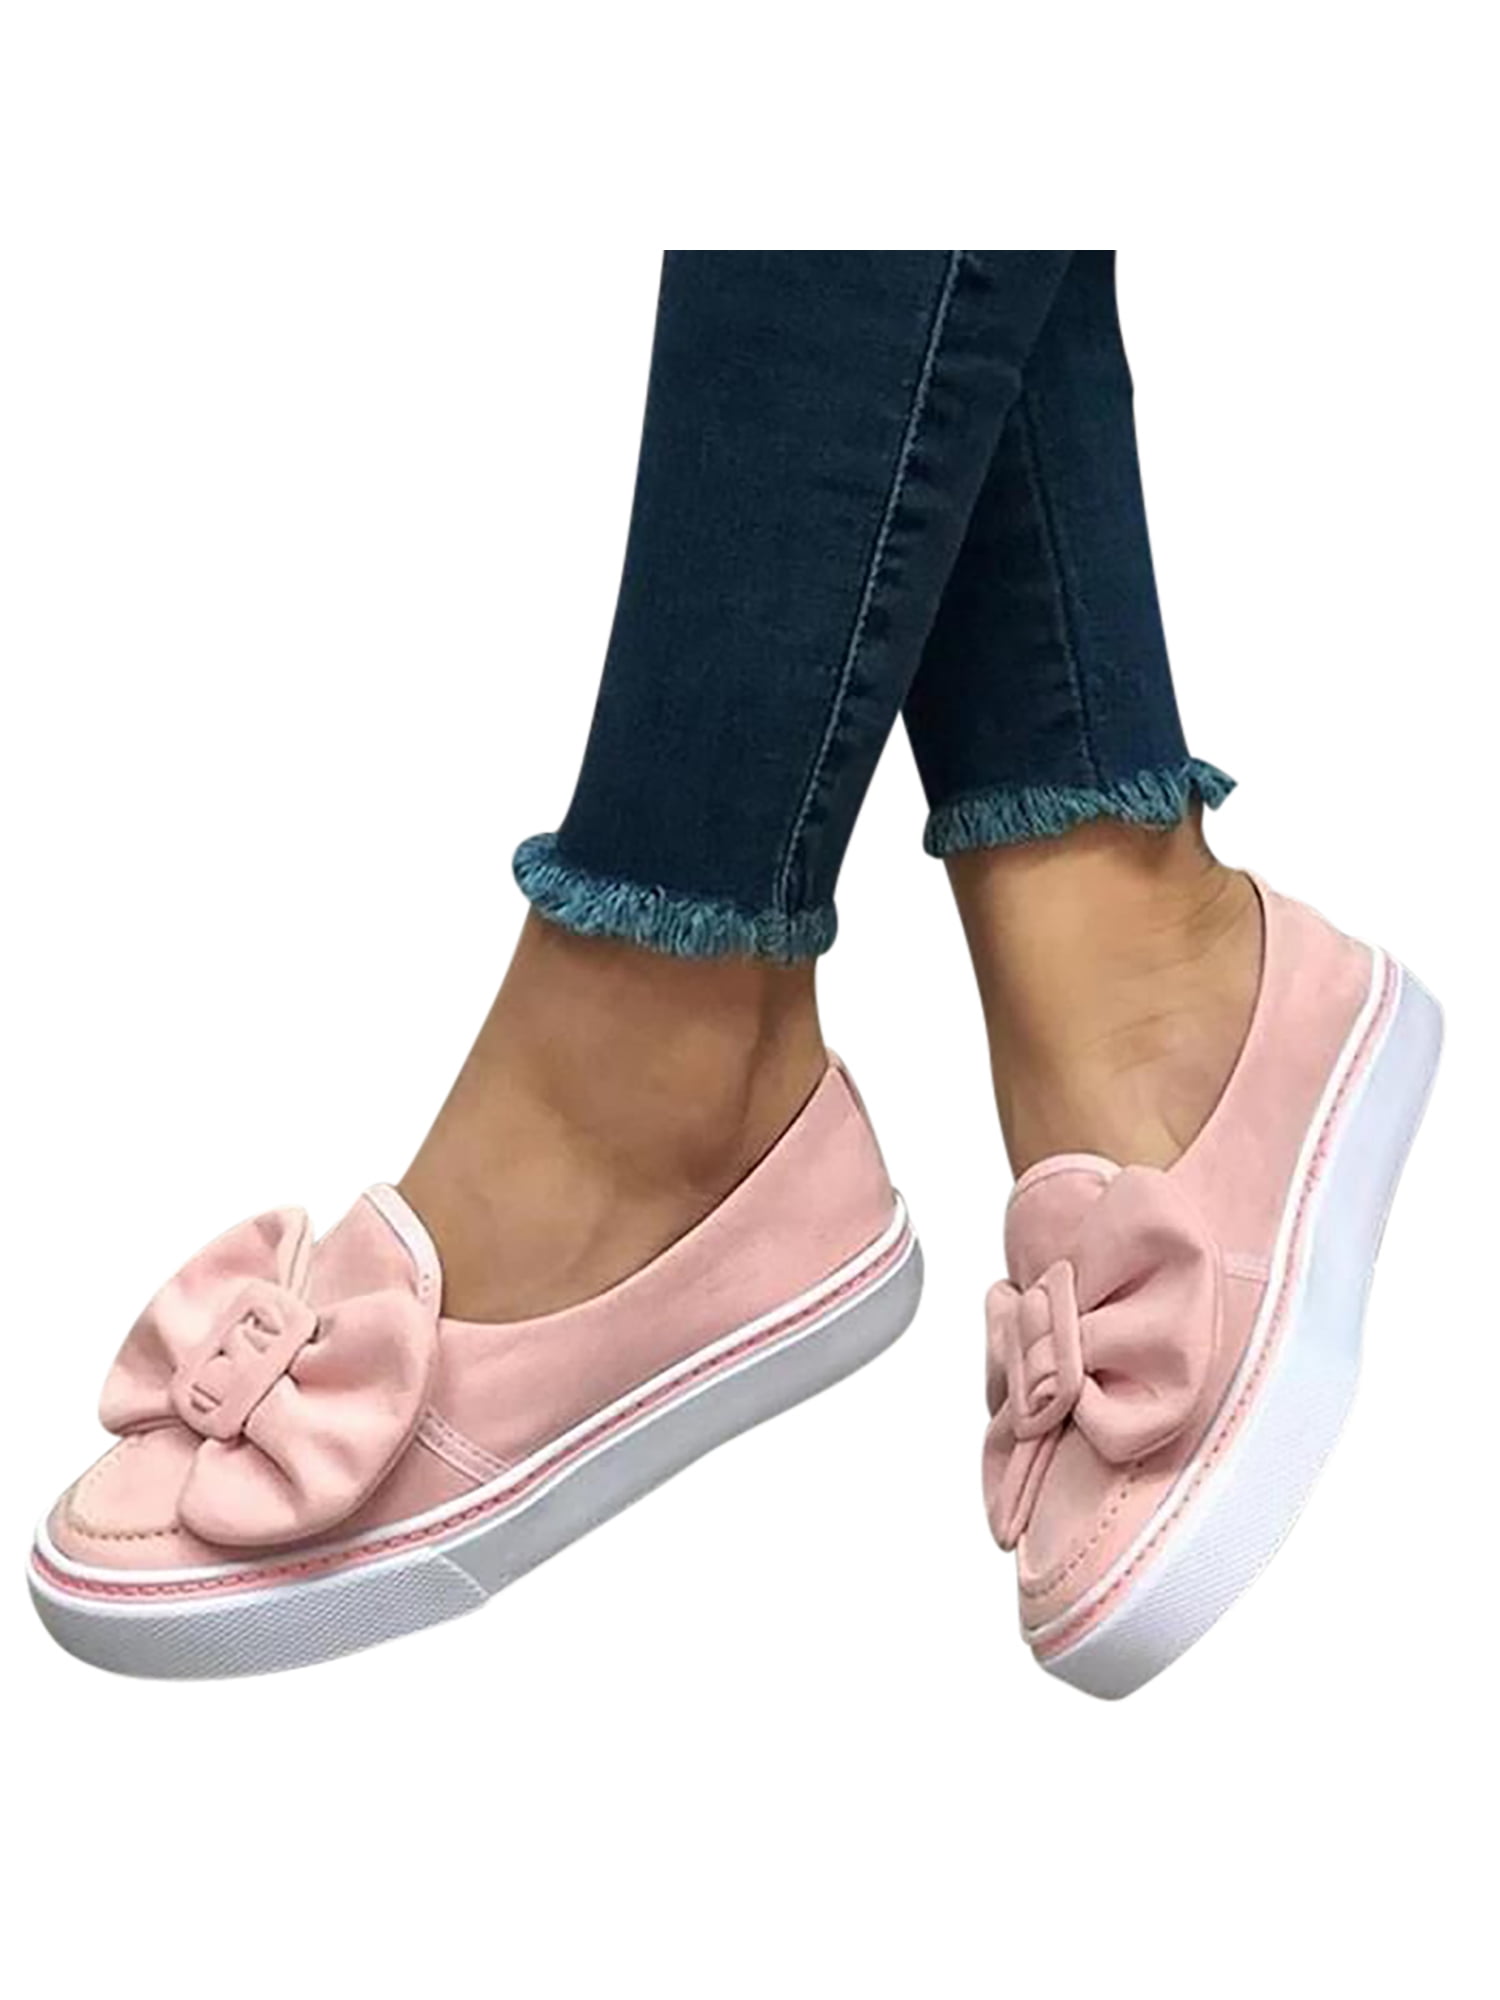 Women Casual Boat Shoes Flats Ballet Leather Loafer  Work Oxford Round Toe WS71 